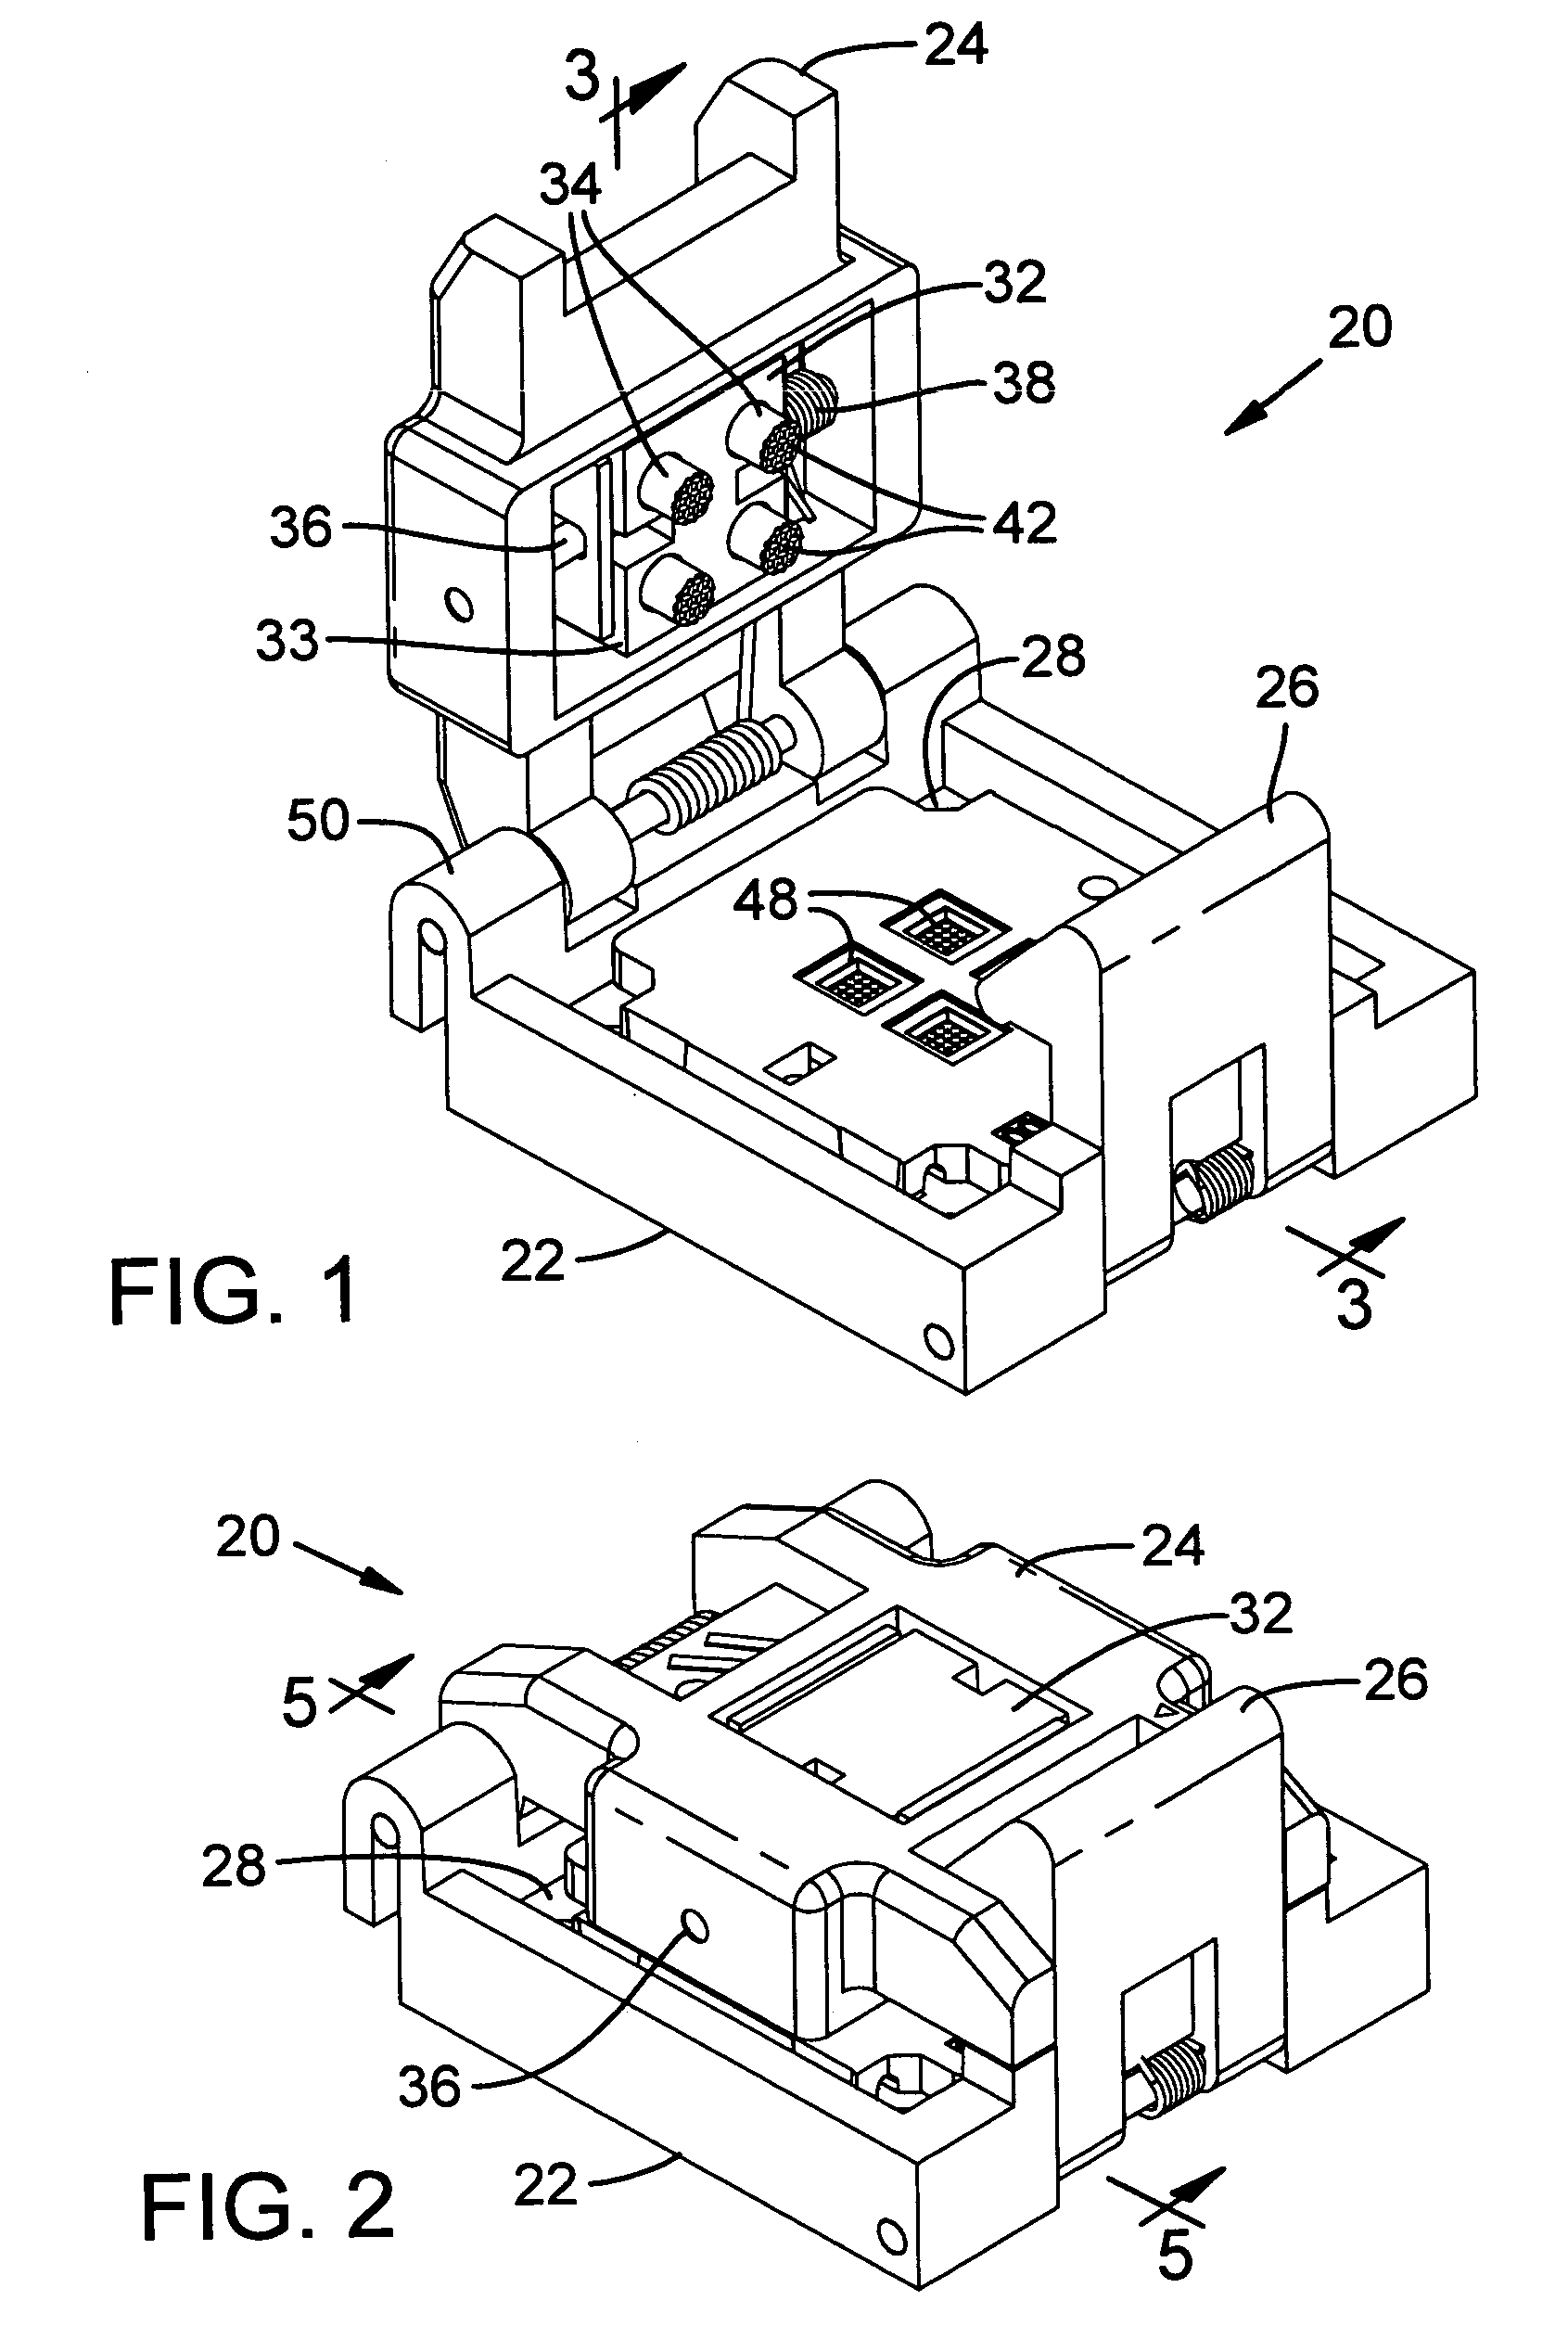 Multi-site chip carrier and method